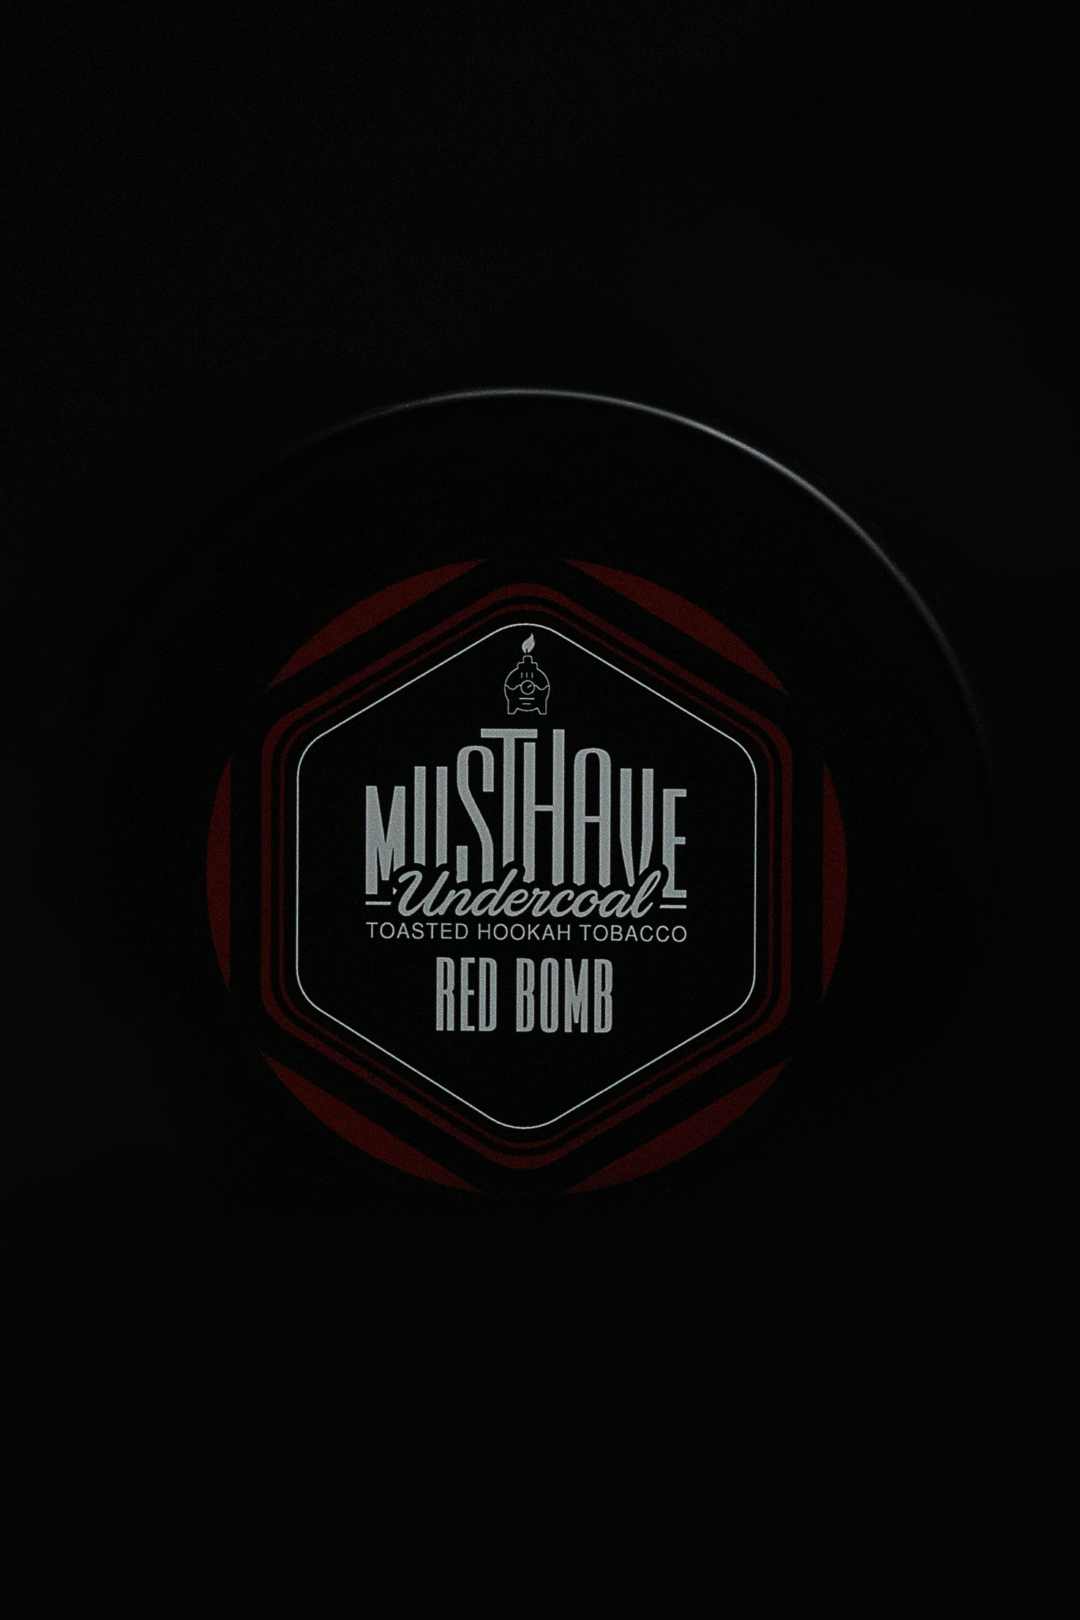 Musthave RED BOMB